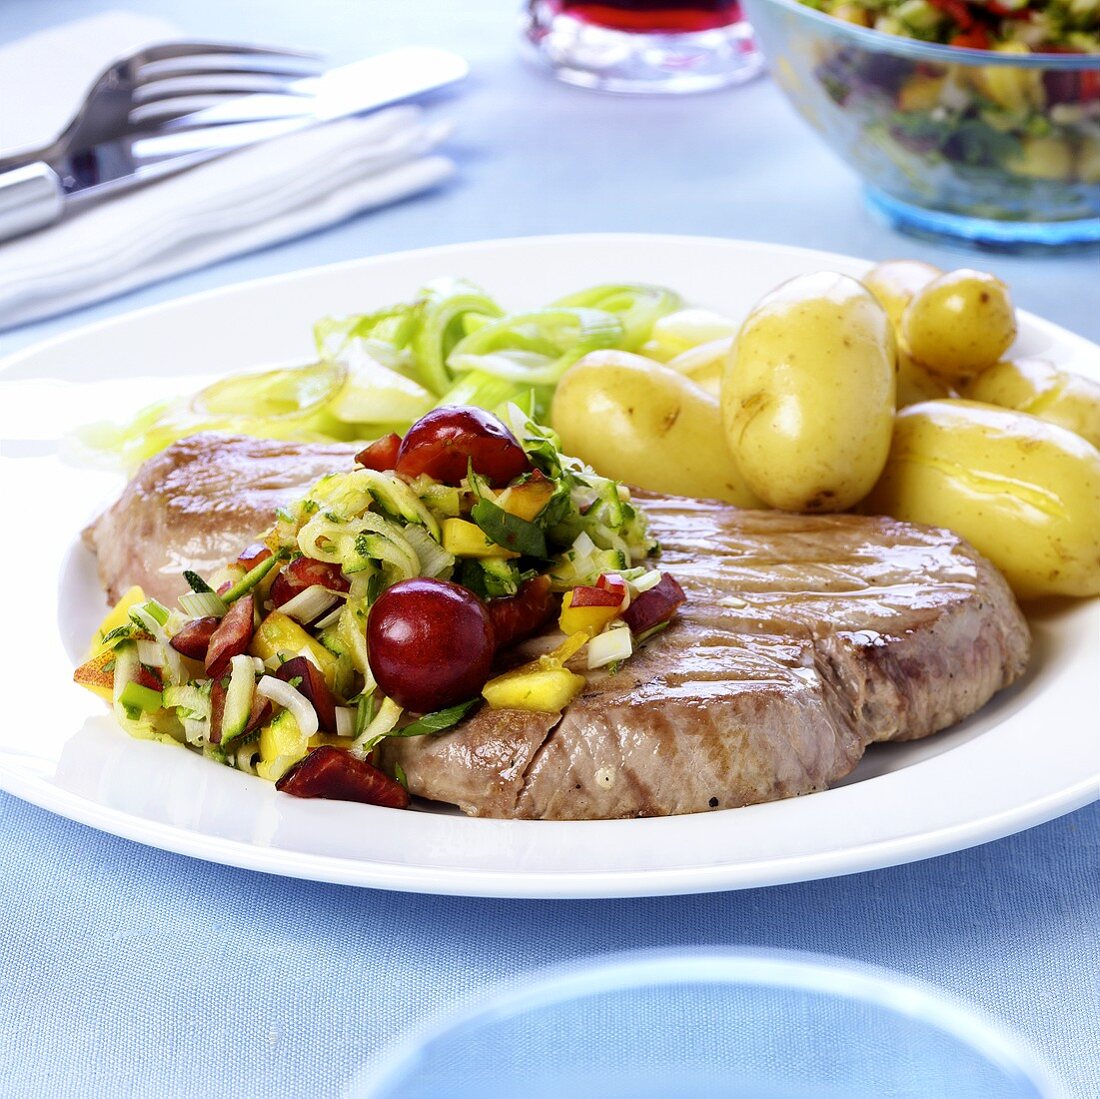 Tuna steak with vegetables and cherries